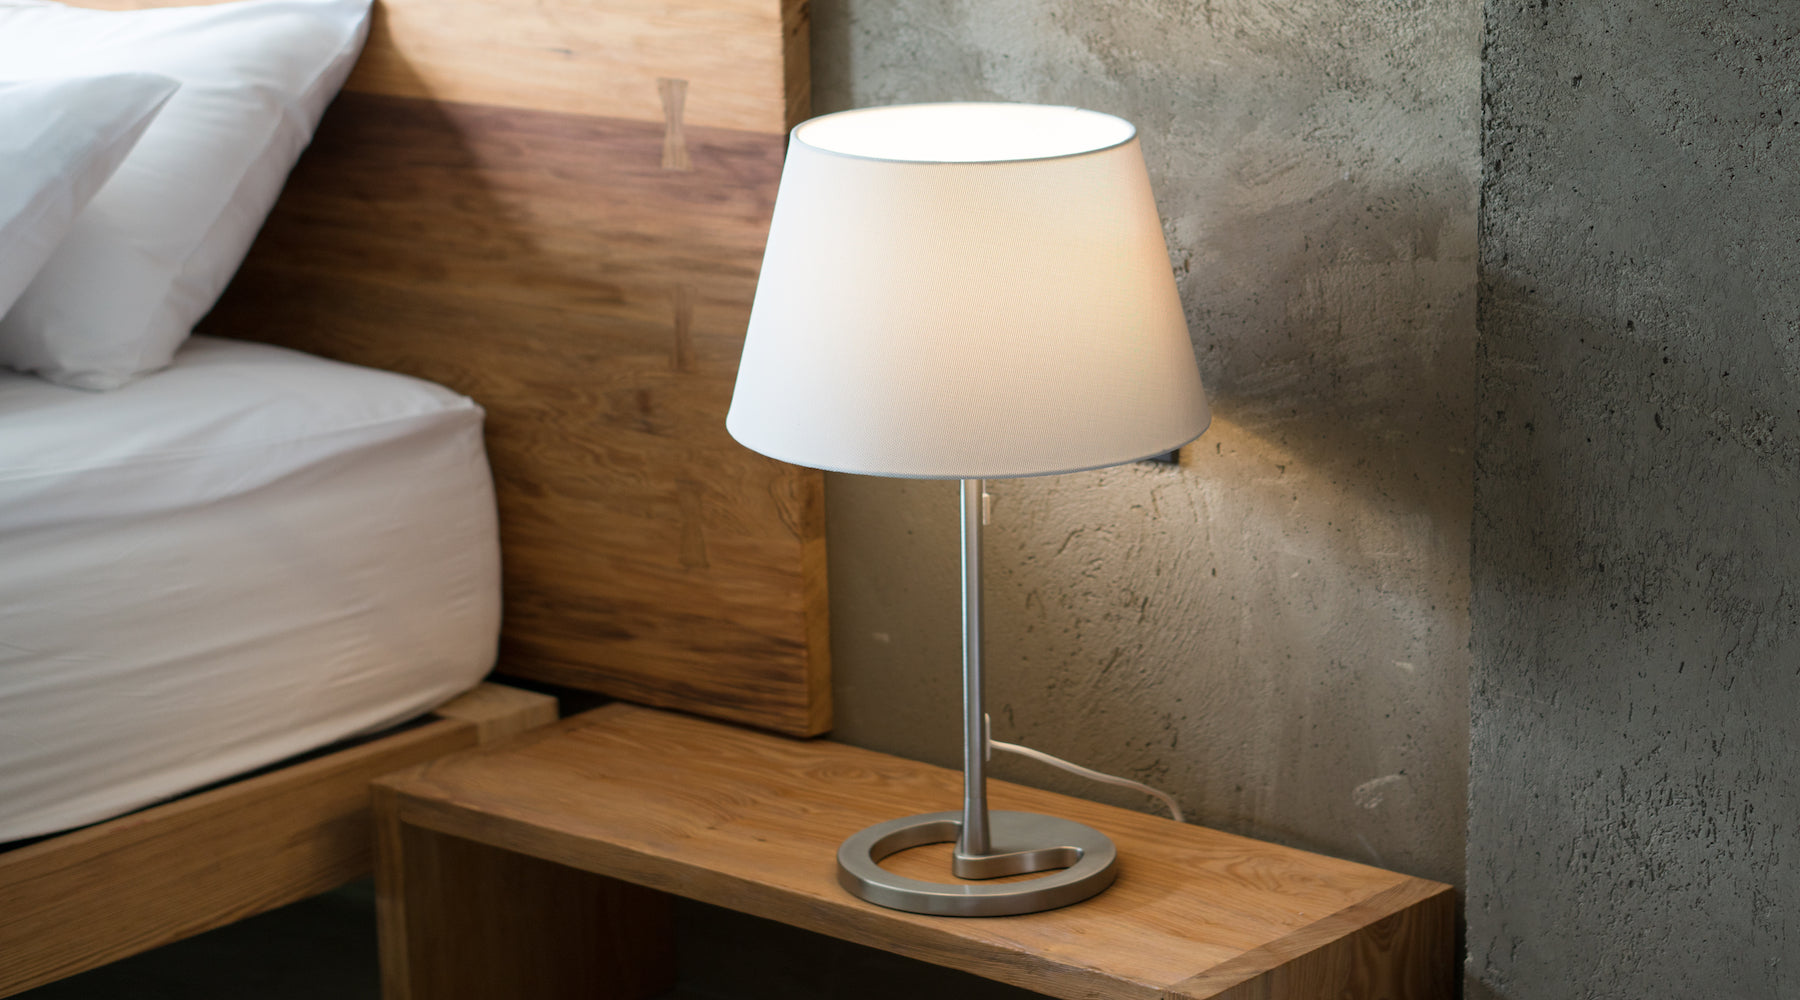 Modern table lamp on bedroom nightstand with bulb illuminated